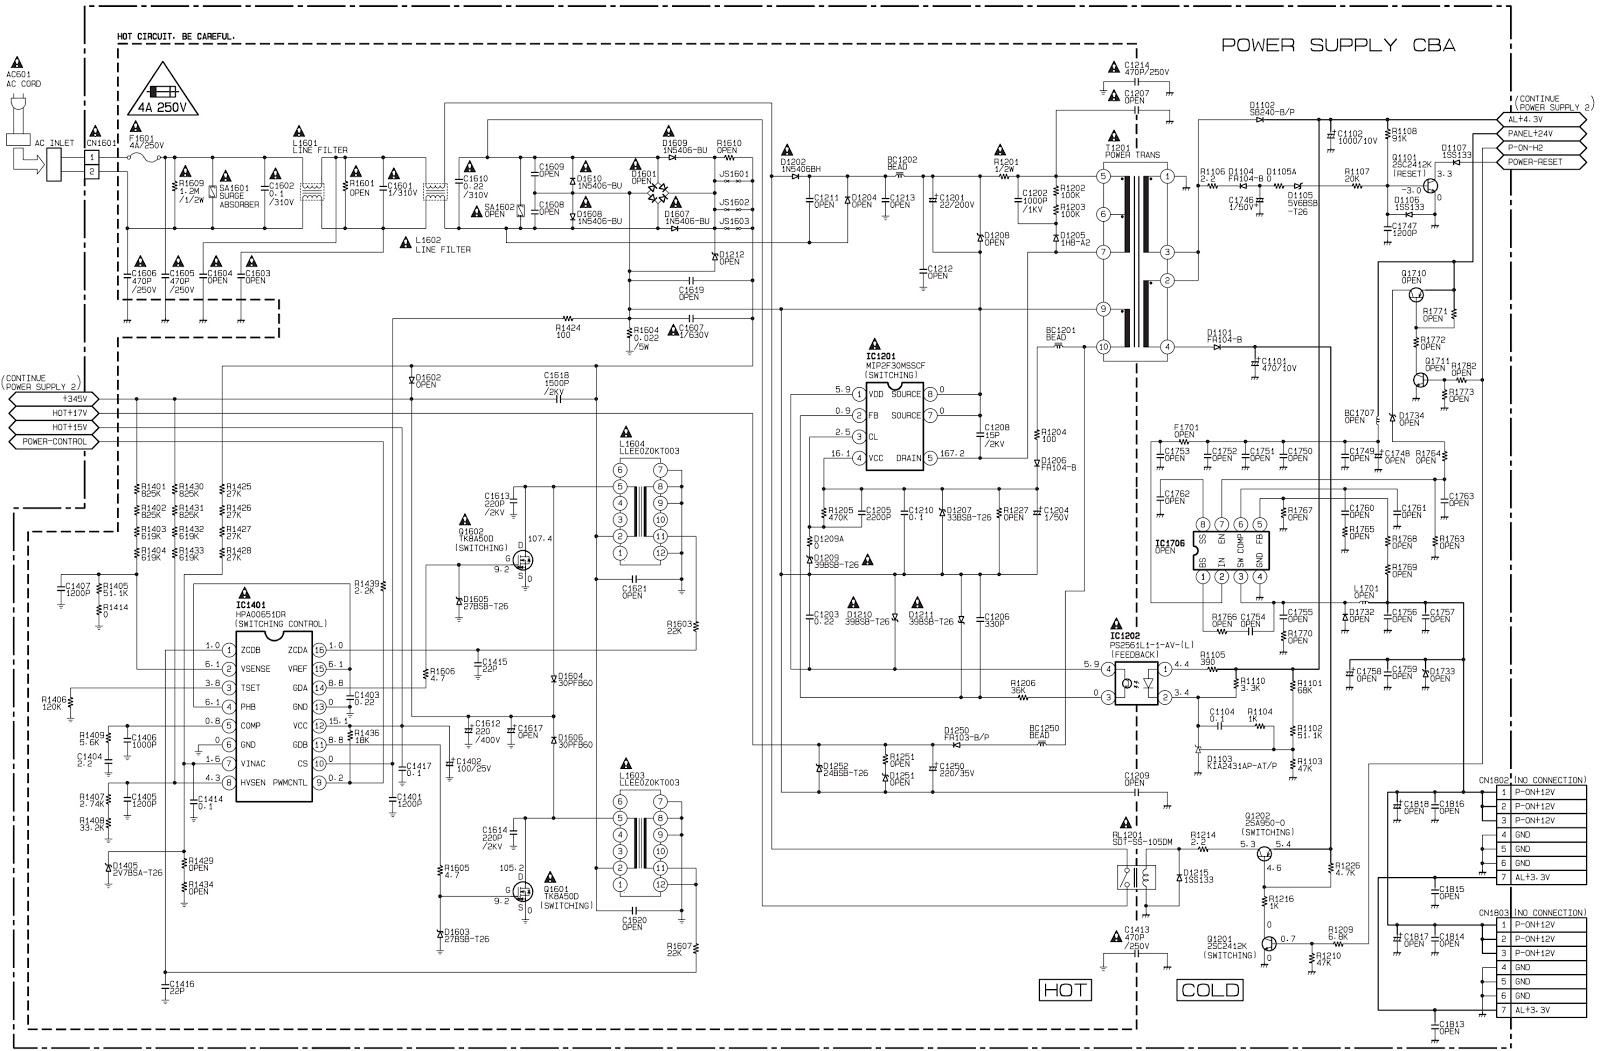 Electro help: Philips 46PFL3706-F7 – LCD TV – Power board schematic